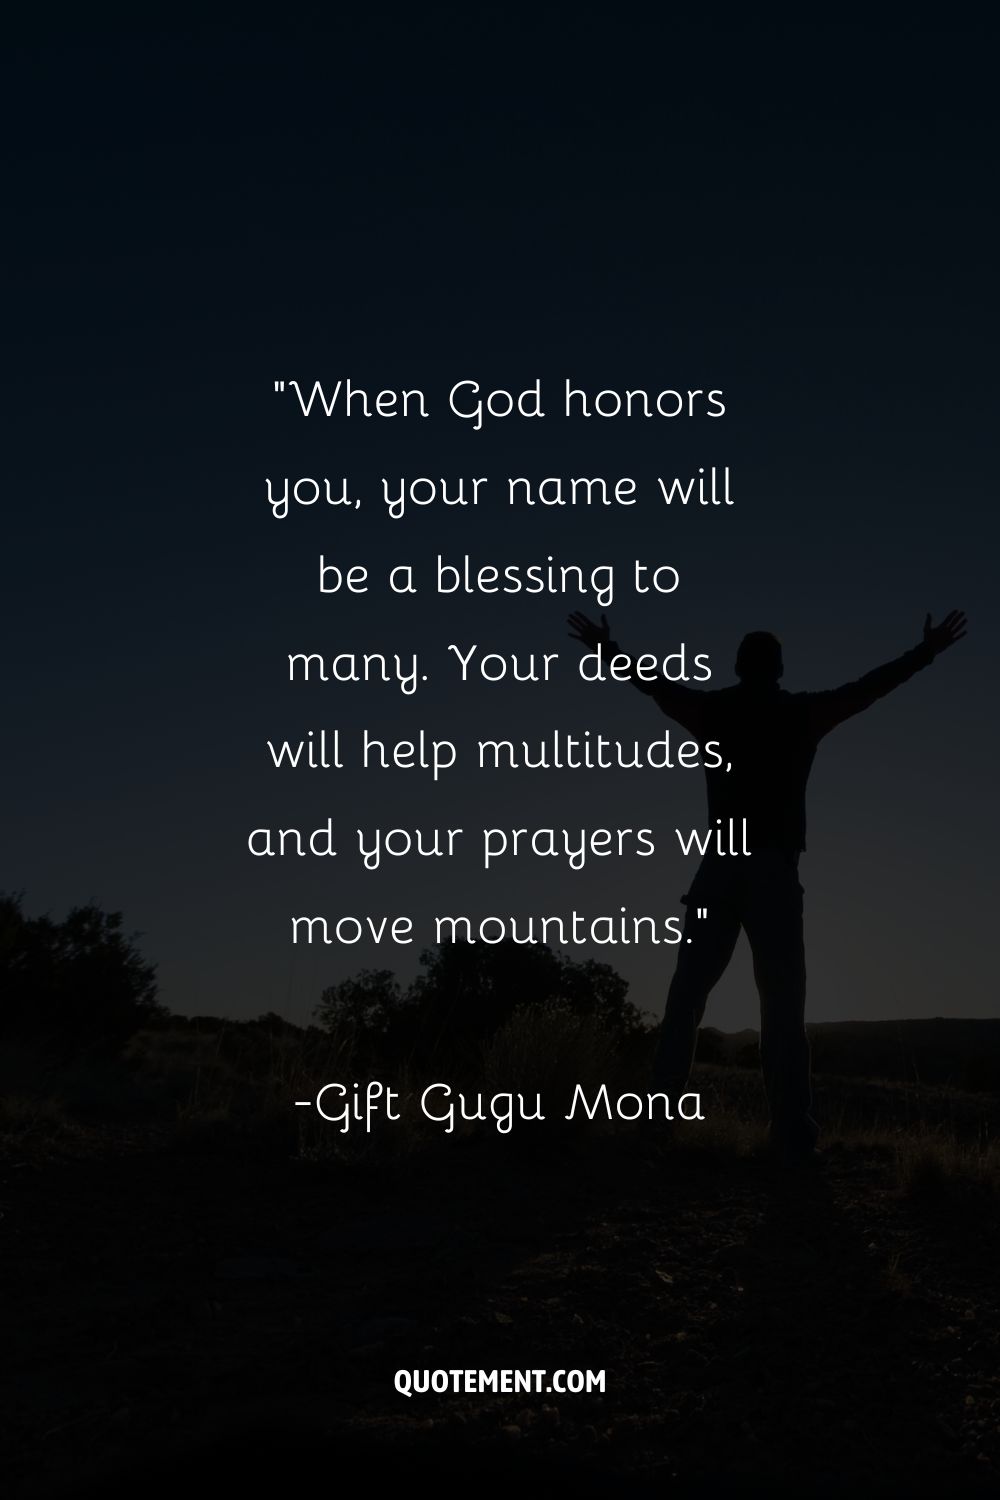 “When God honors you, your name will be a blessing to many. Your deeds will help multitudes, and your prayers will move mountains.”